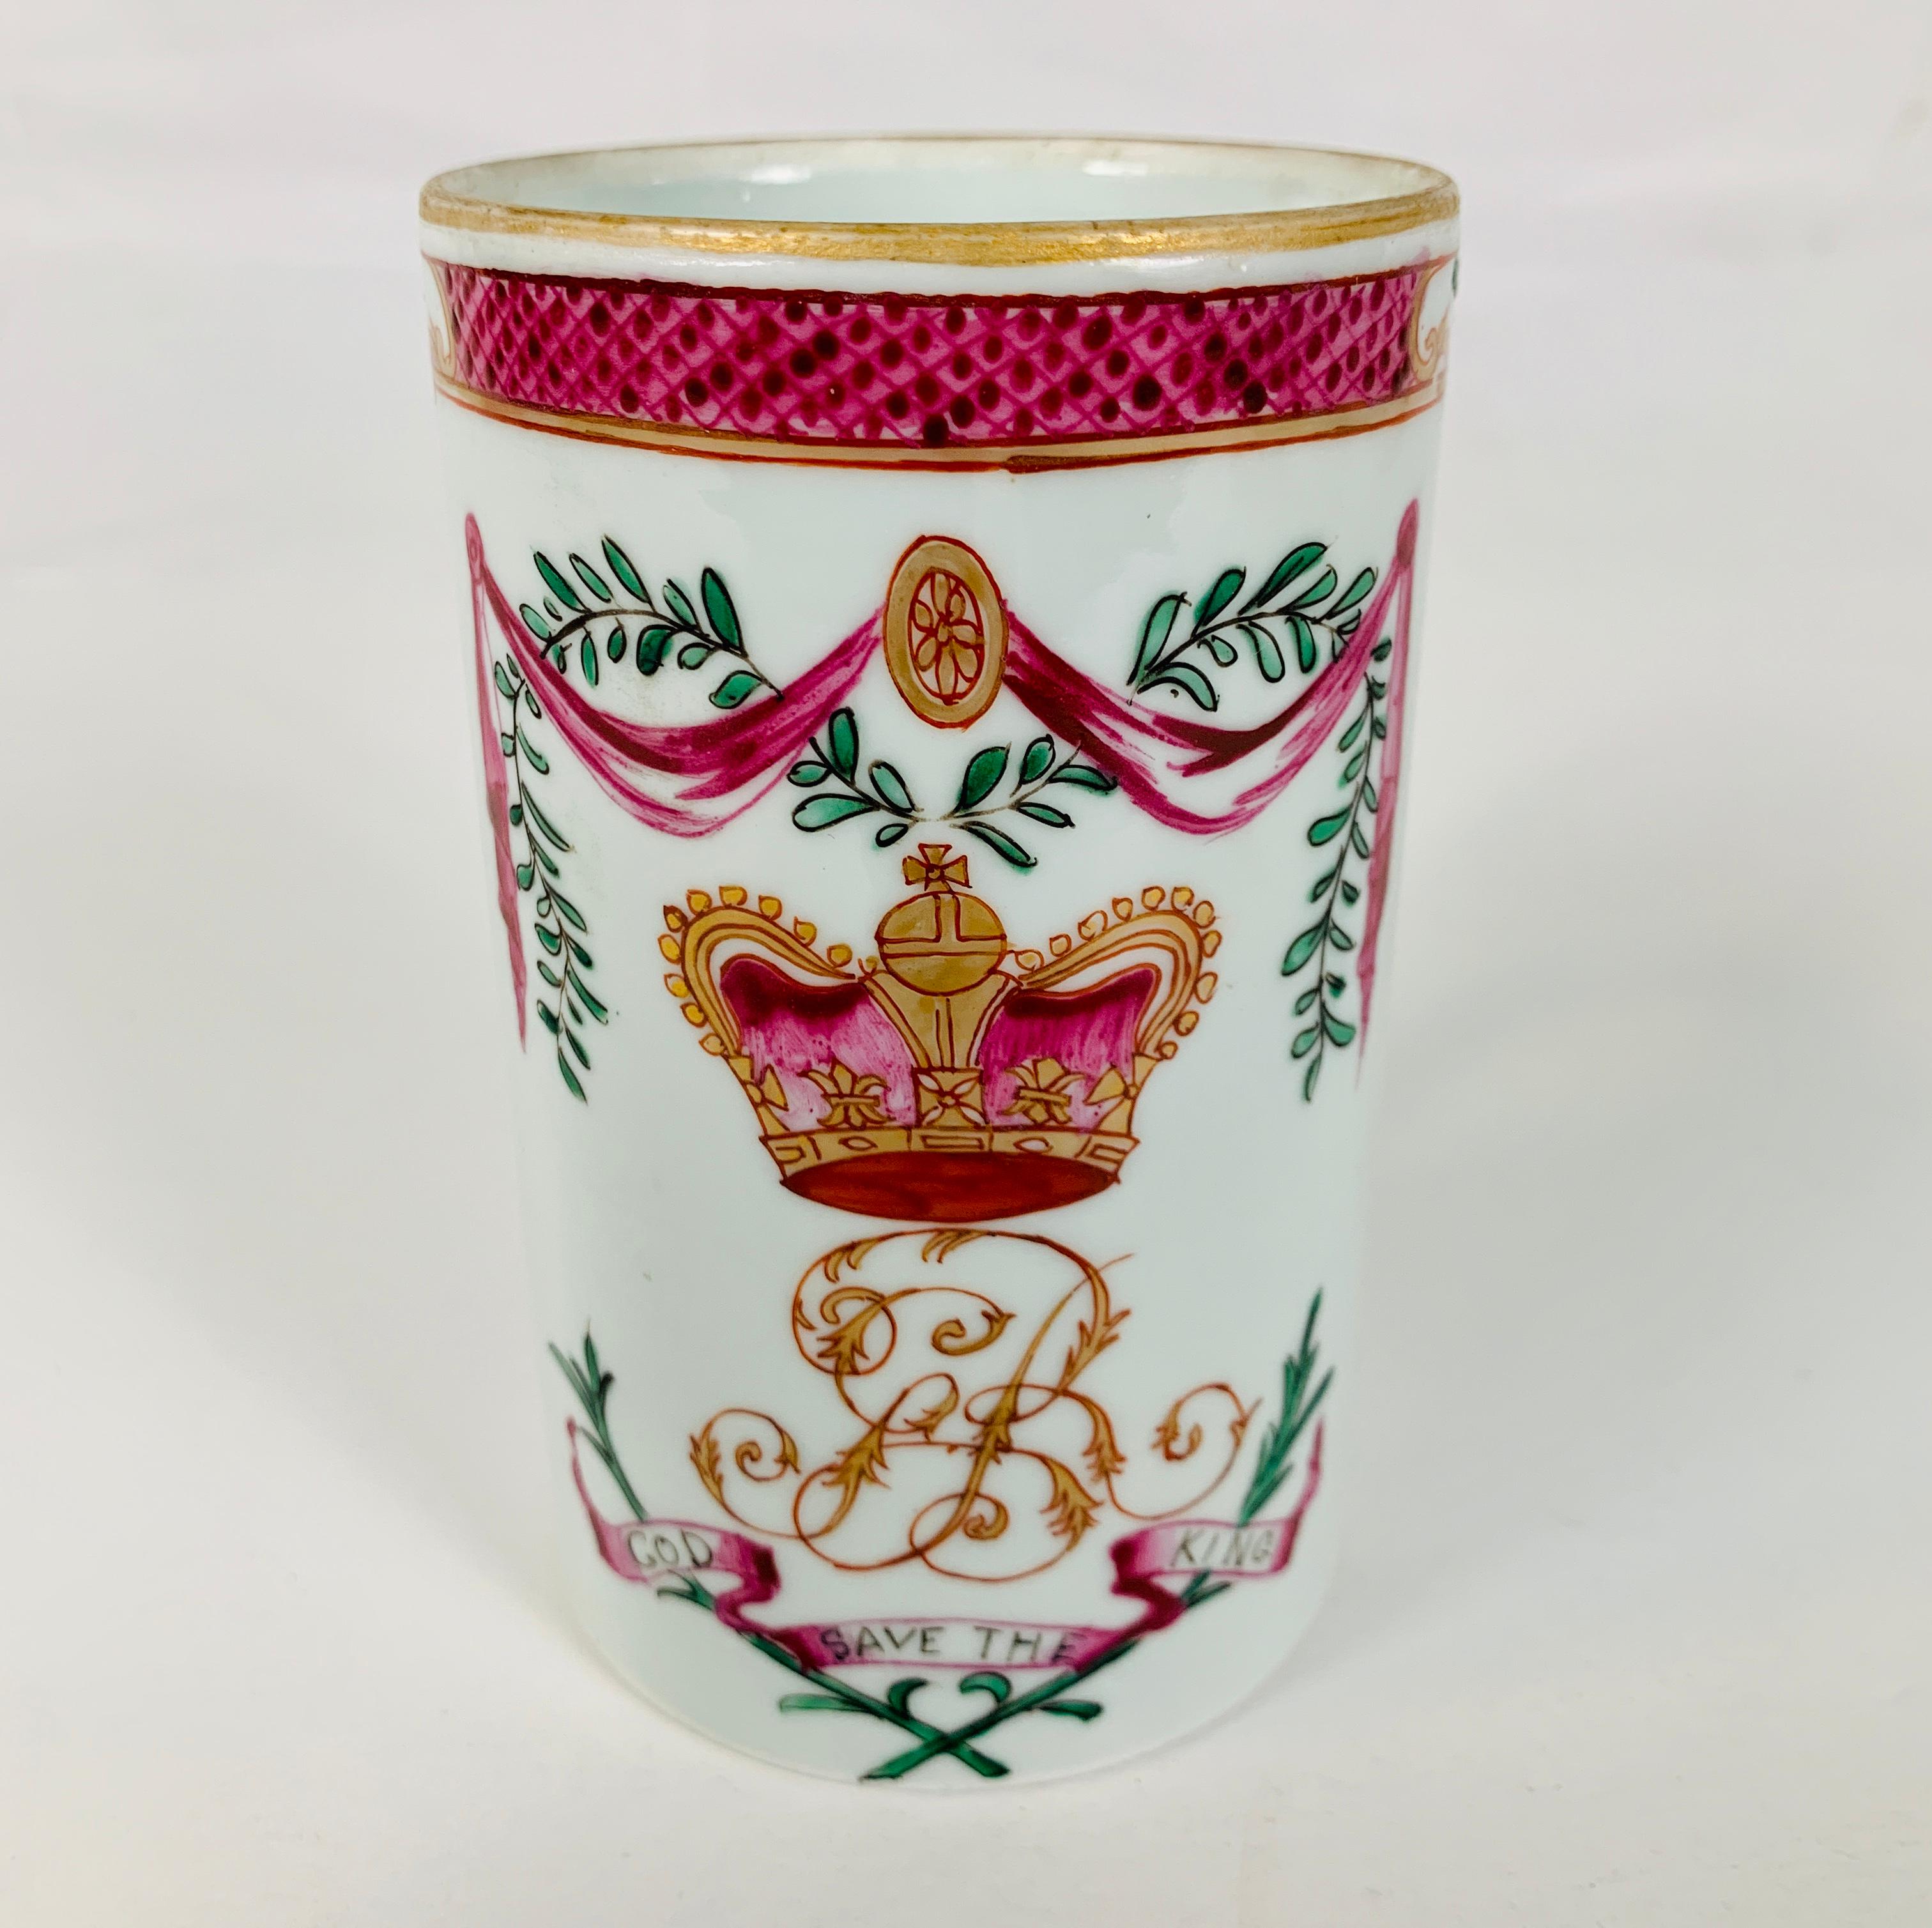 Provenance:
The Private Collection of Mario Buatta
This 18th-century Chinese porcelain mug is hand-painted with a crown above the motto 